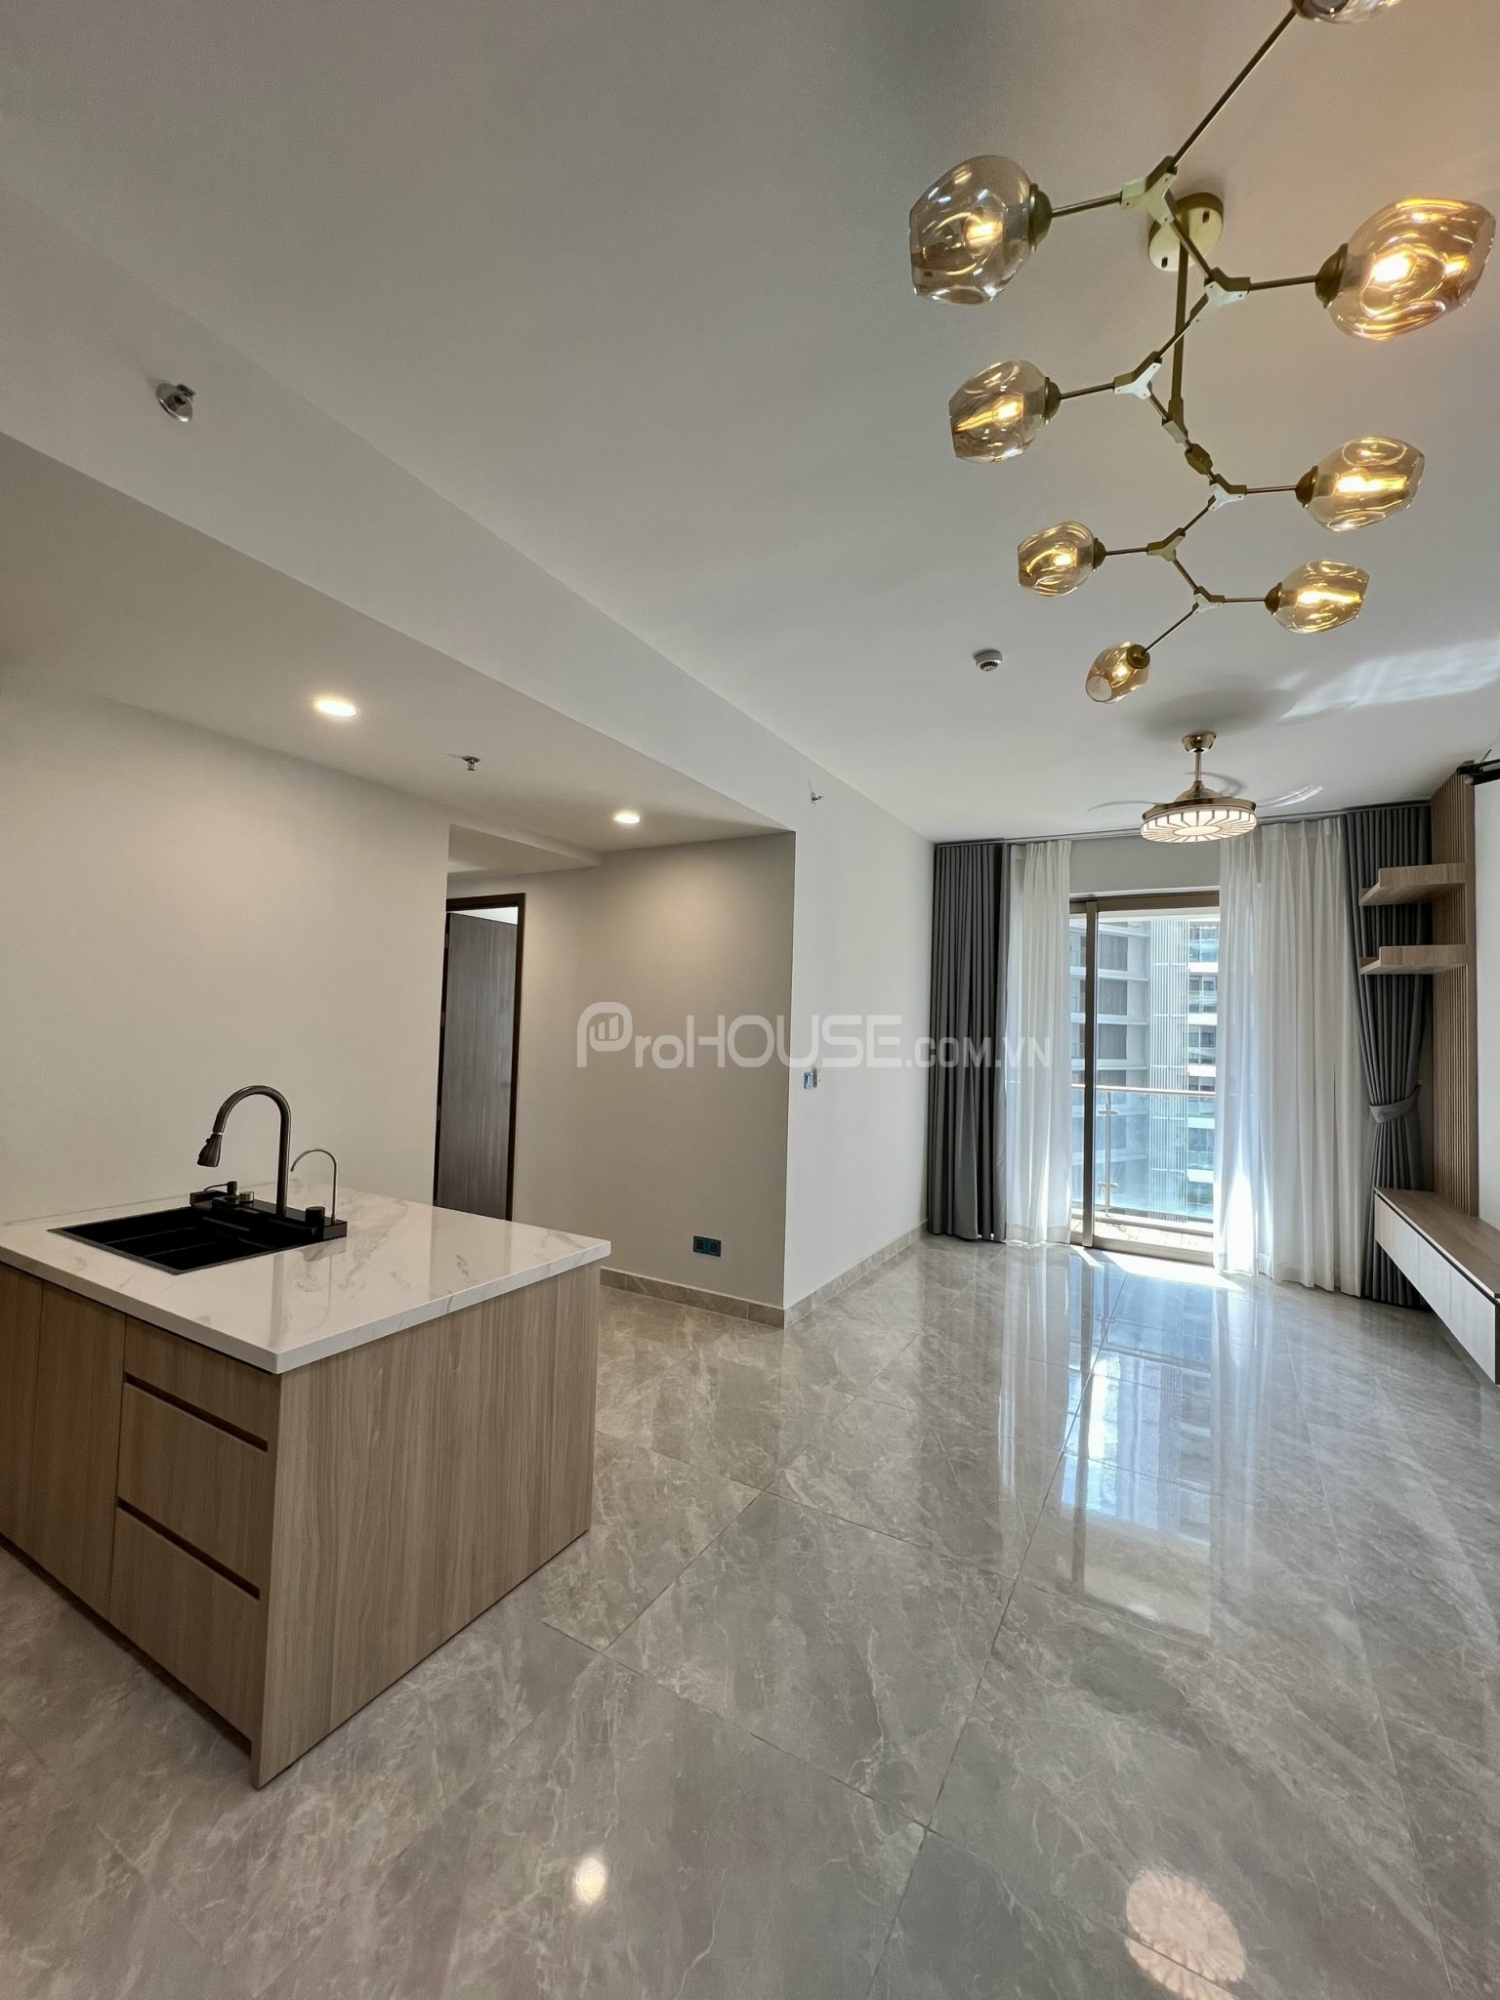 2 bedroom apartment for rent in The Peak with full furniture